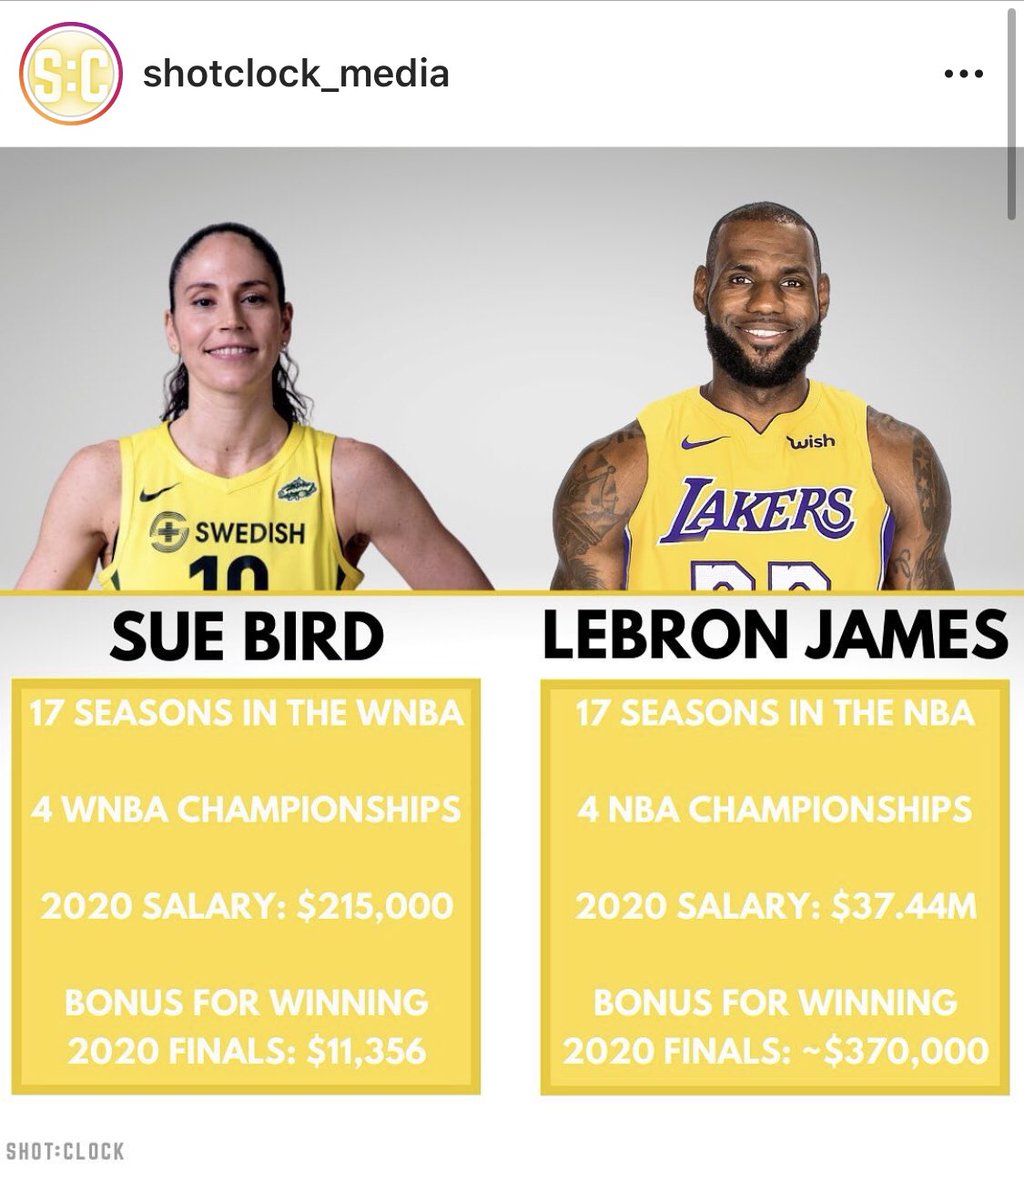 Being a crossover account for a second: Two champions, @S10Bird and @KingJames, have the same number of seasons (17) and championships (4) in the @WNBA and @NBA. Salary difference in 2020: 💵37.2 MILLION DOLLARS💵 Credit: @shotclock_media on IG